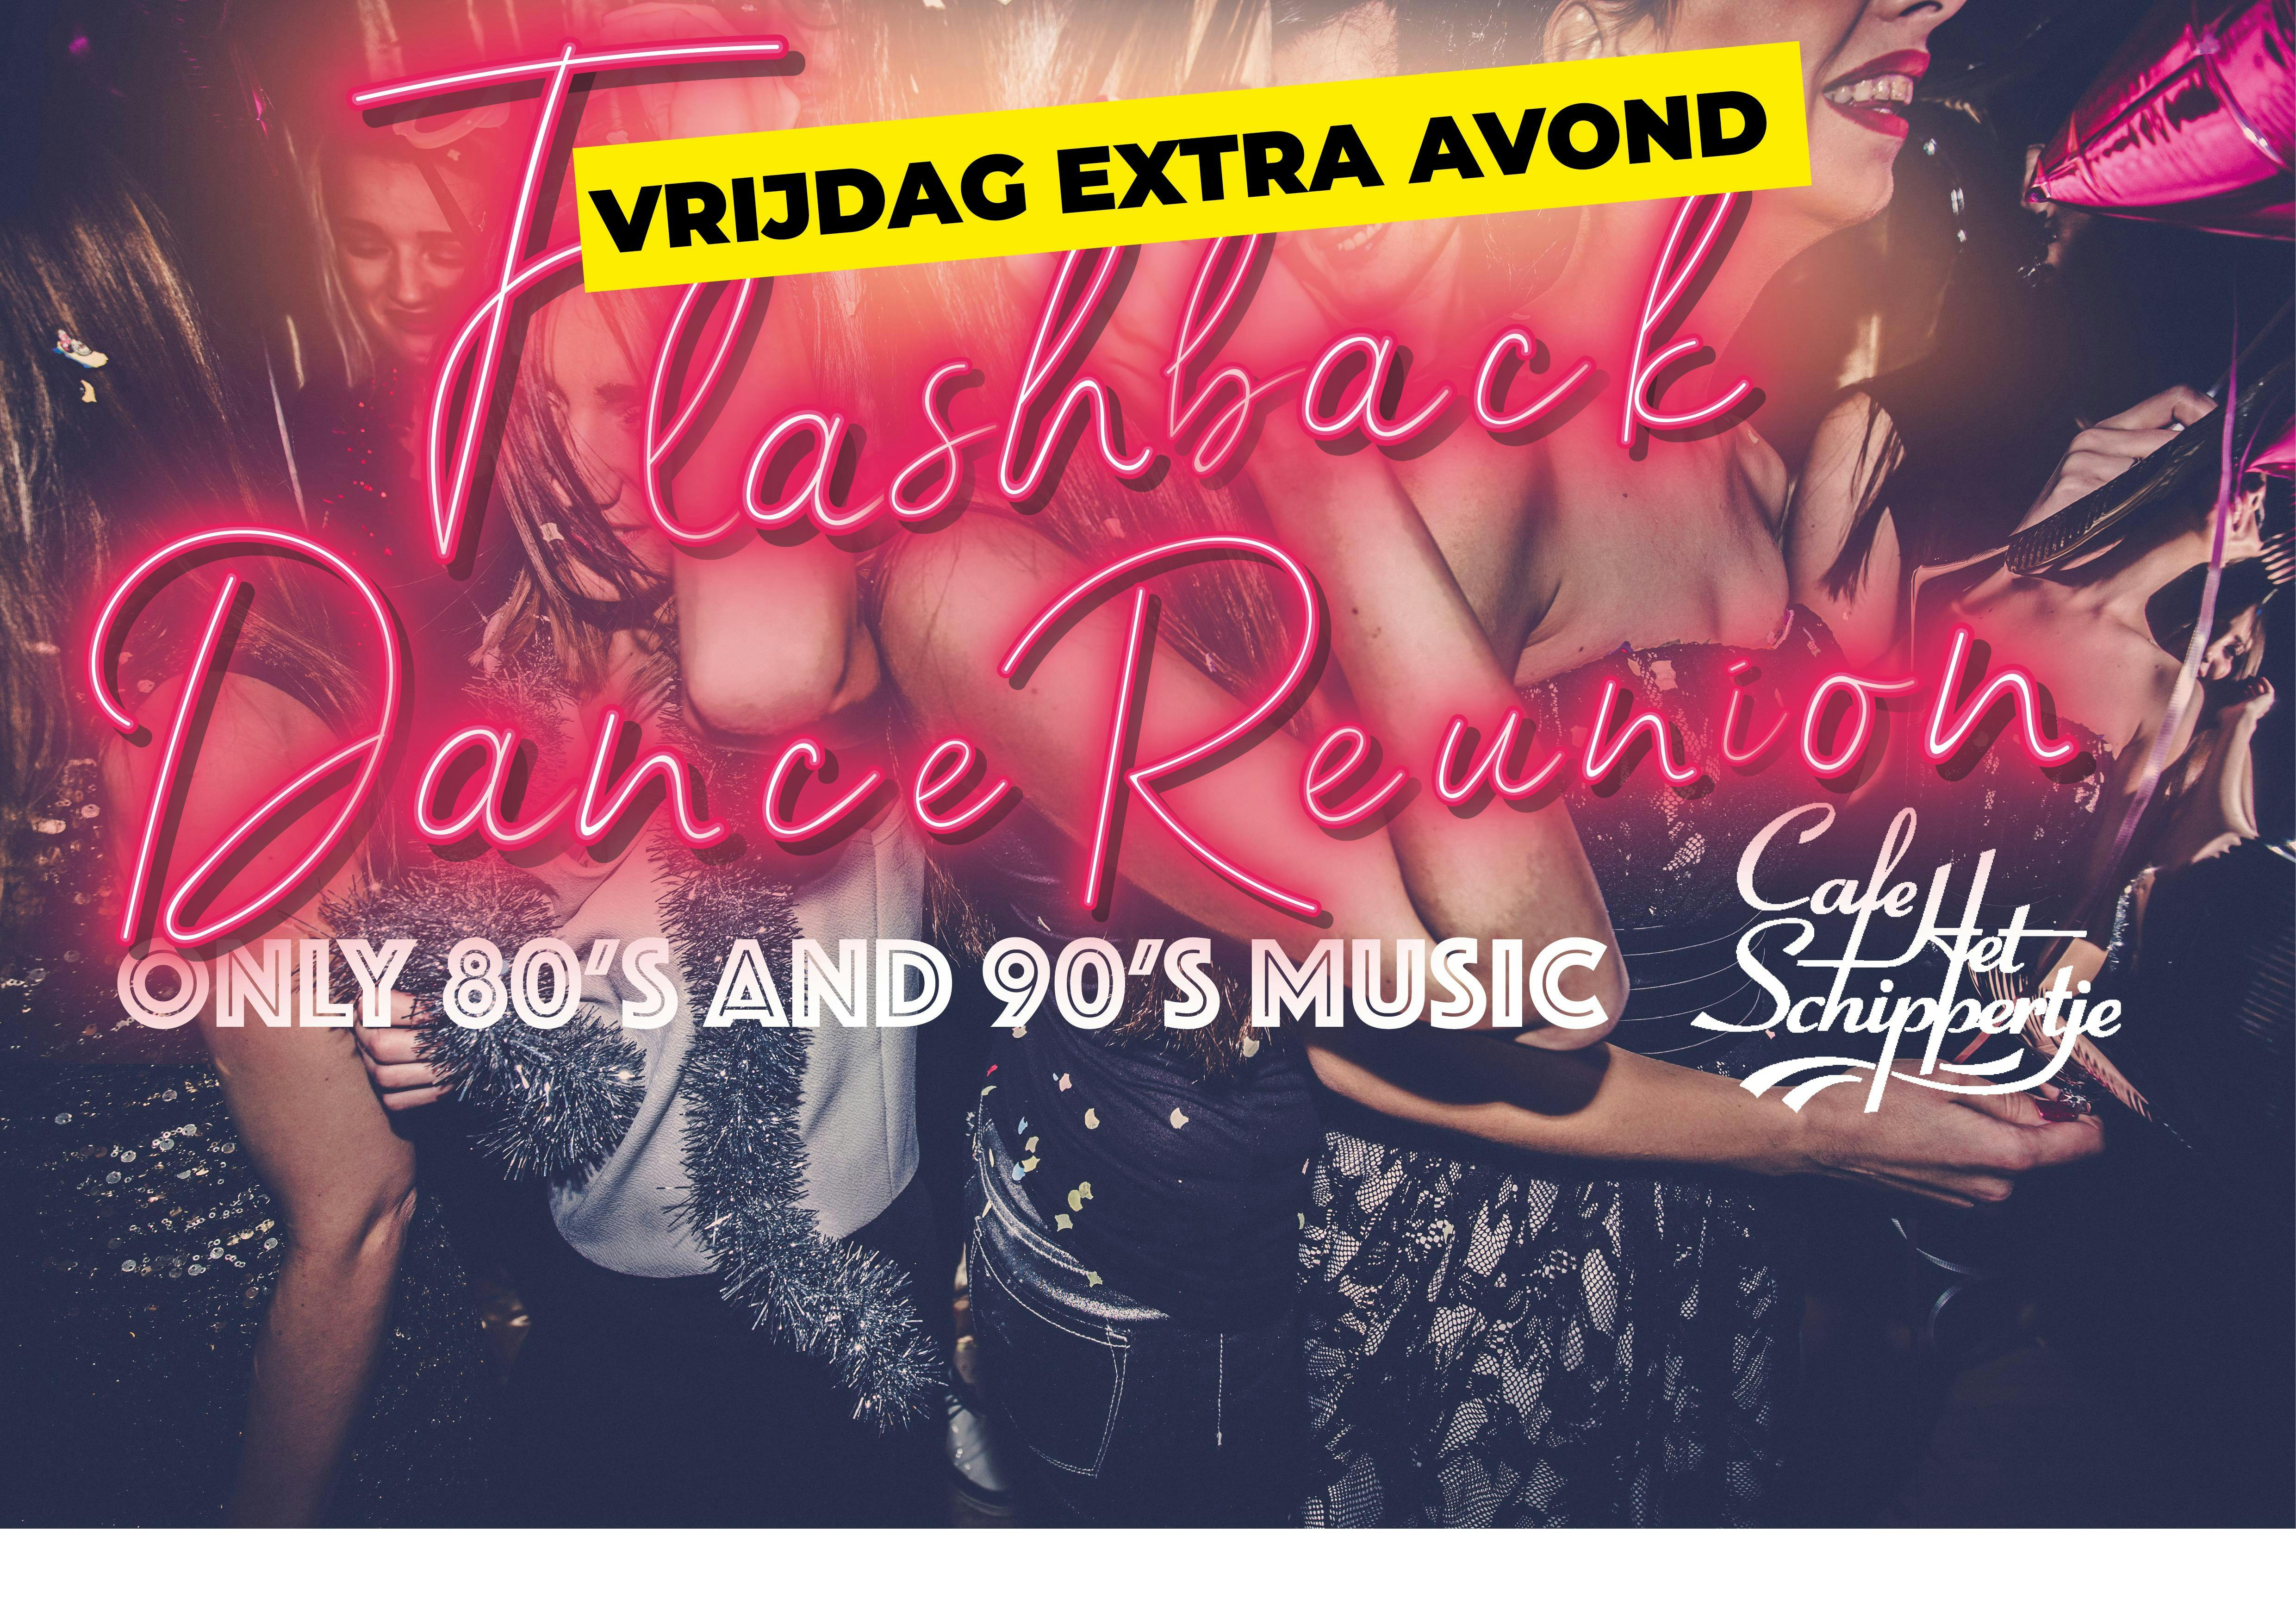 Flashback to 80's and 90's | The Dance Reunion *** EXTRA AVOND ***